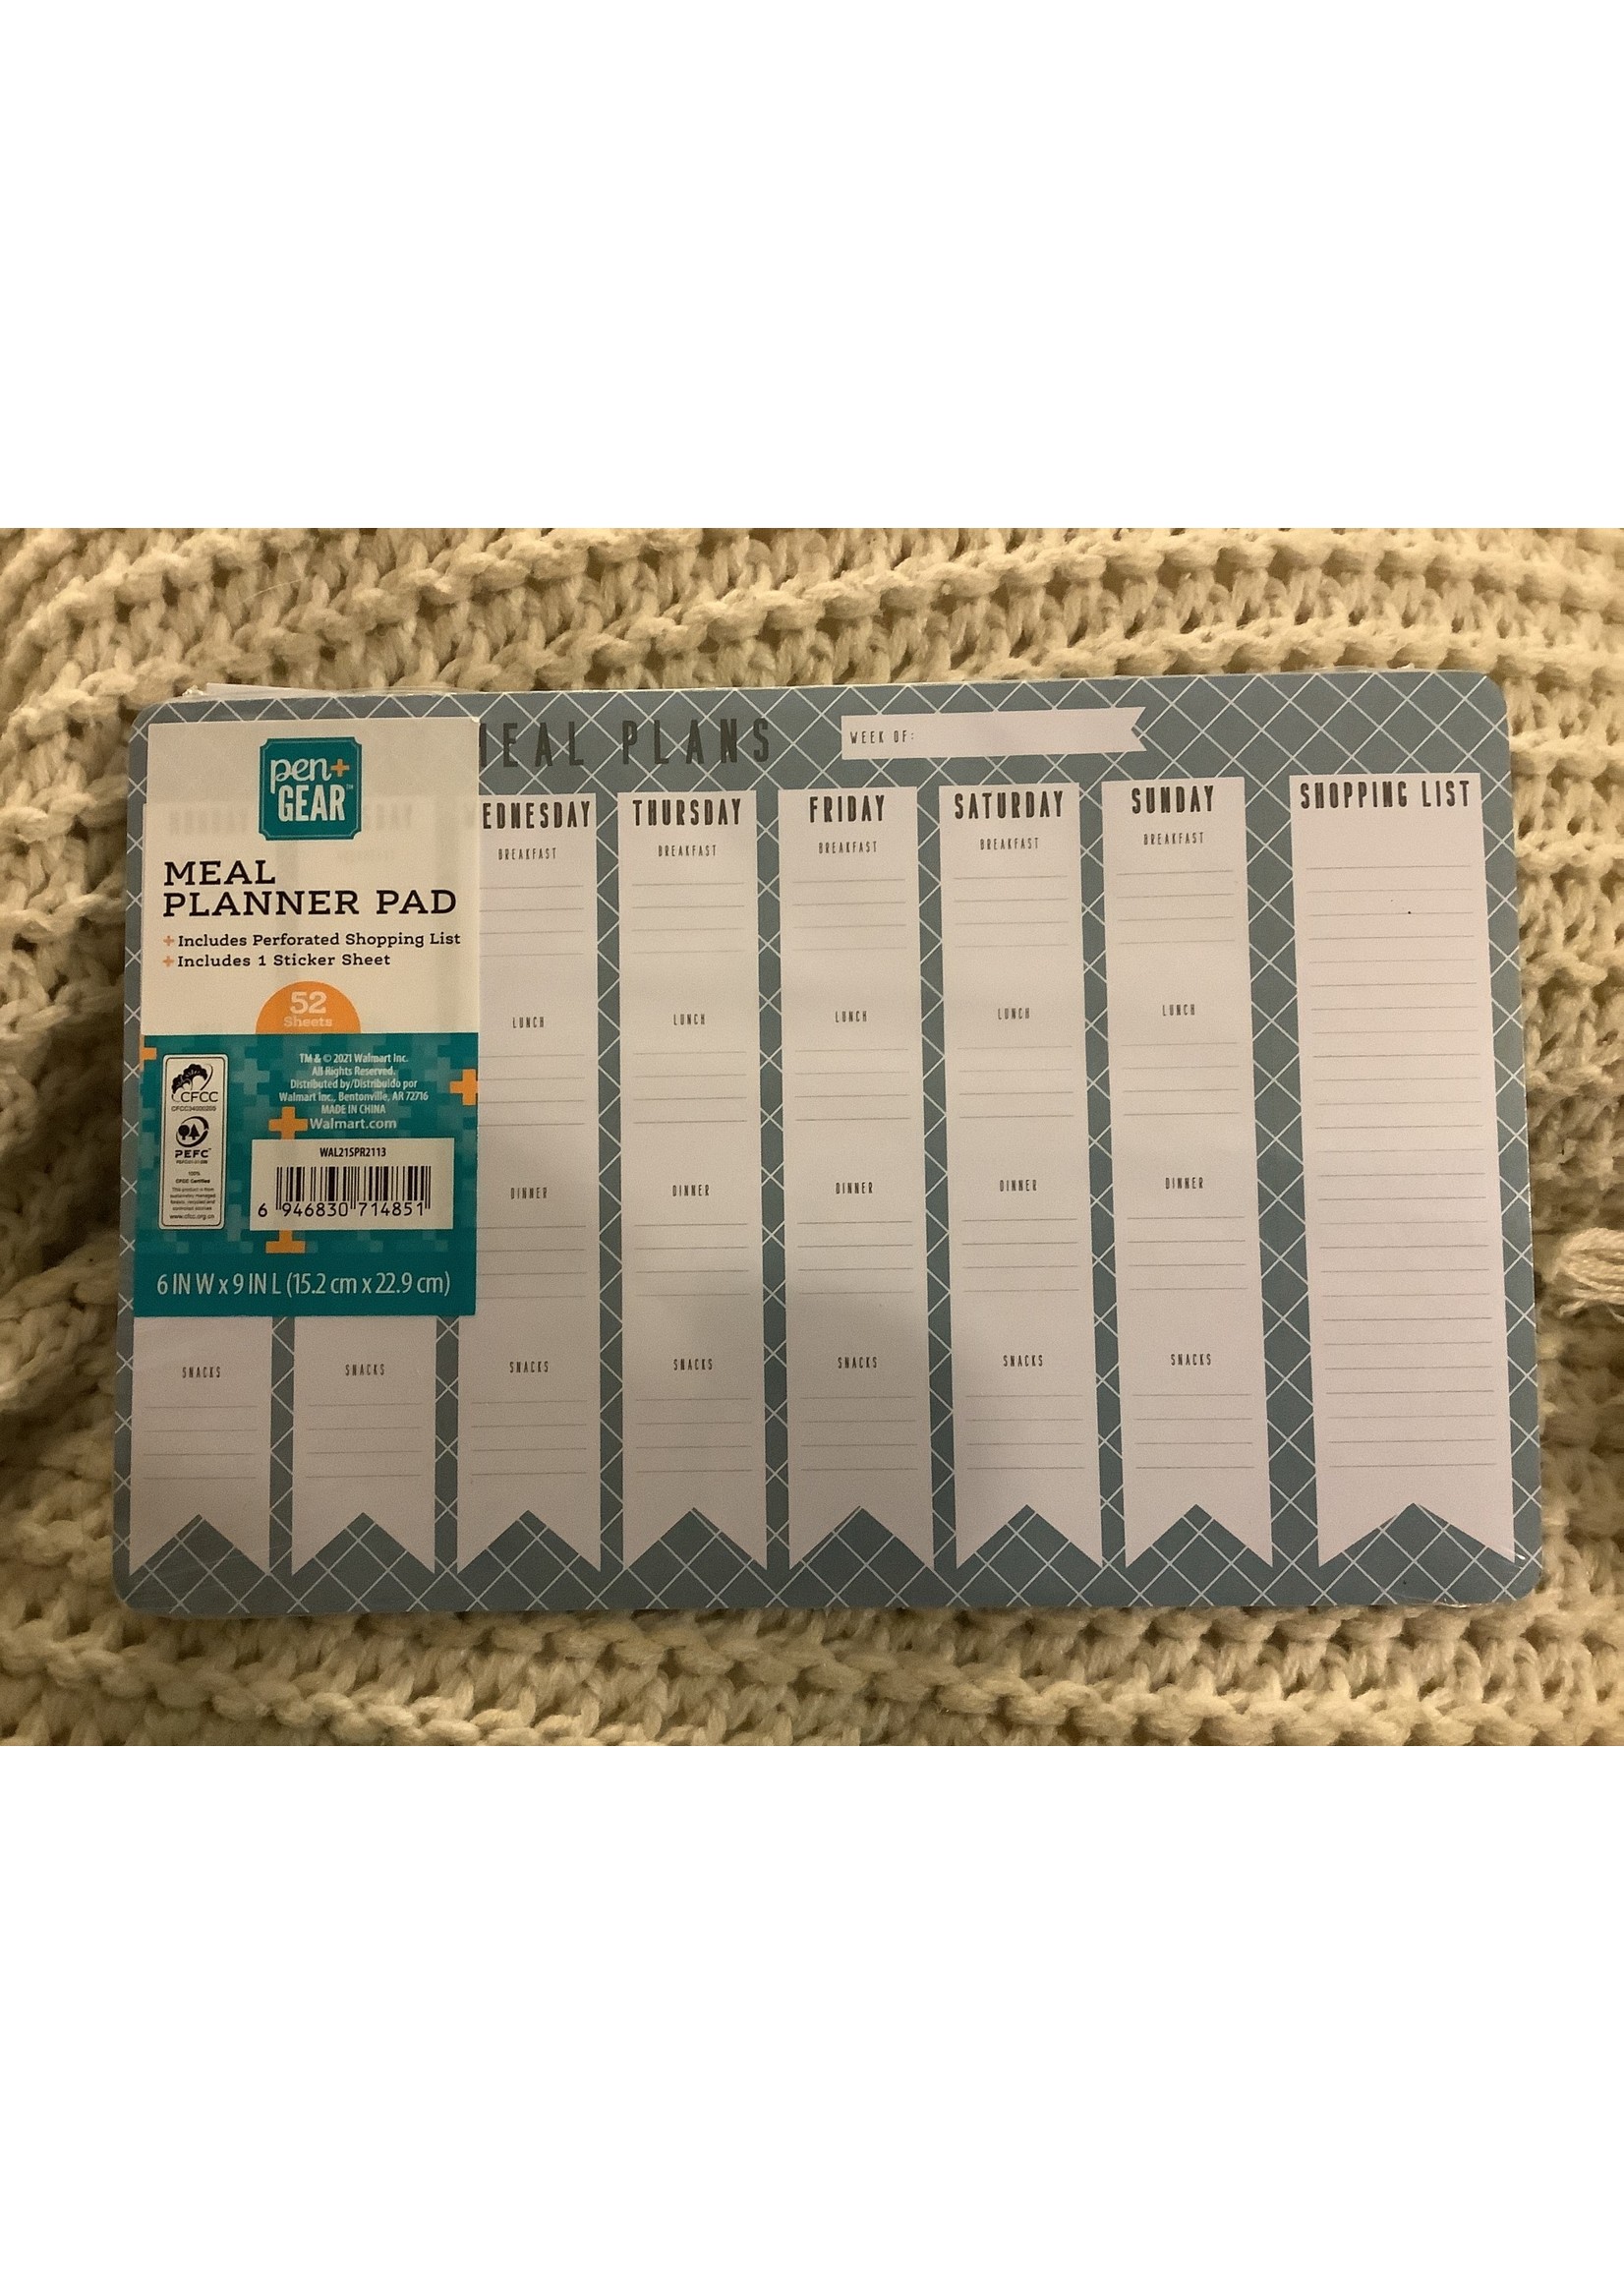 Meal Planner Pad - Pen + Gear 6”x9” 52 sheets